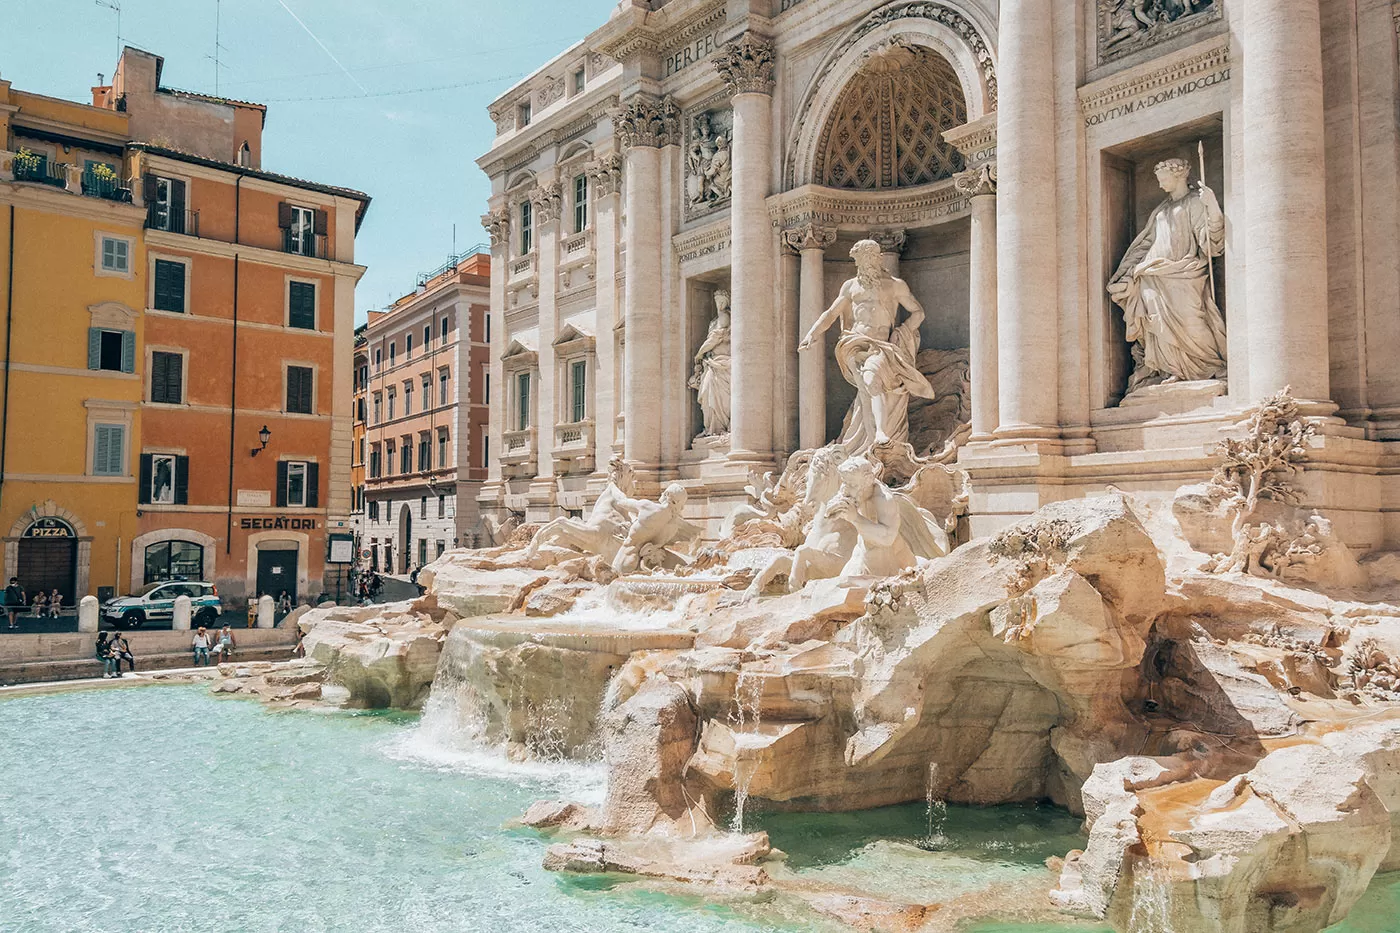 BEST HOTELS Near the Trevi Fountain in Rome